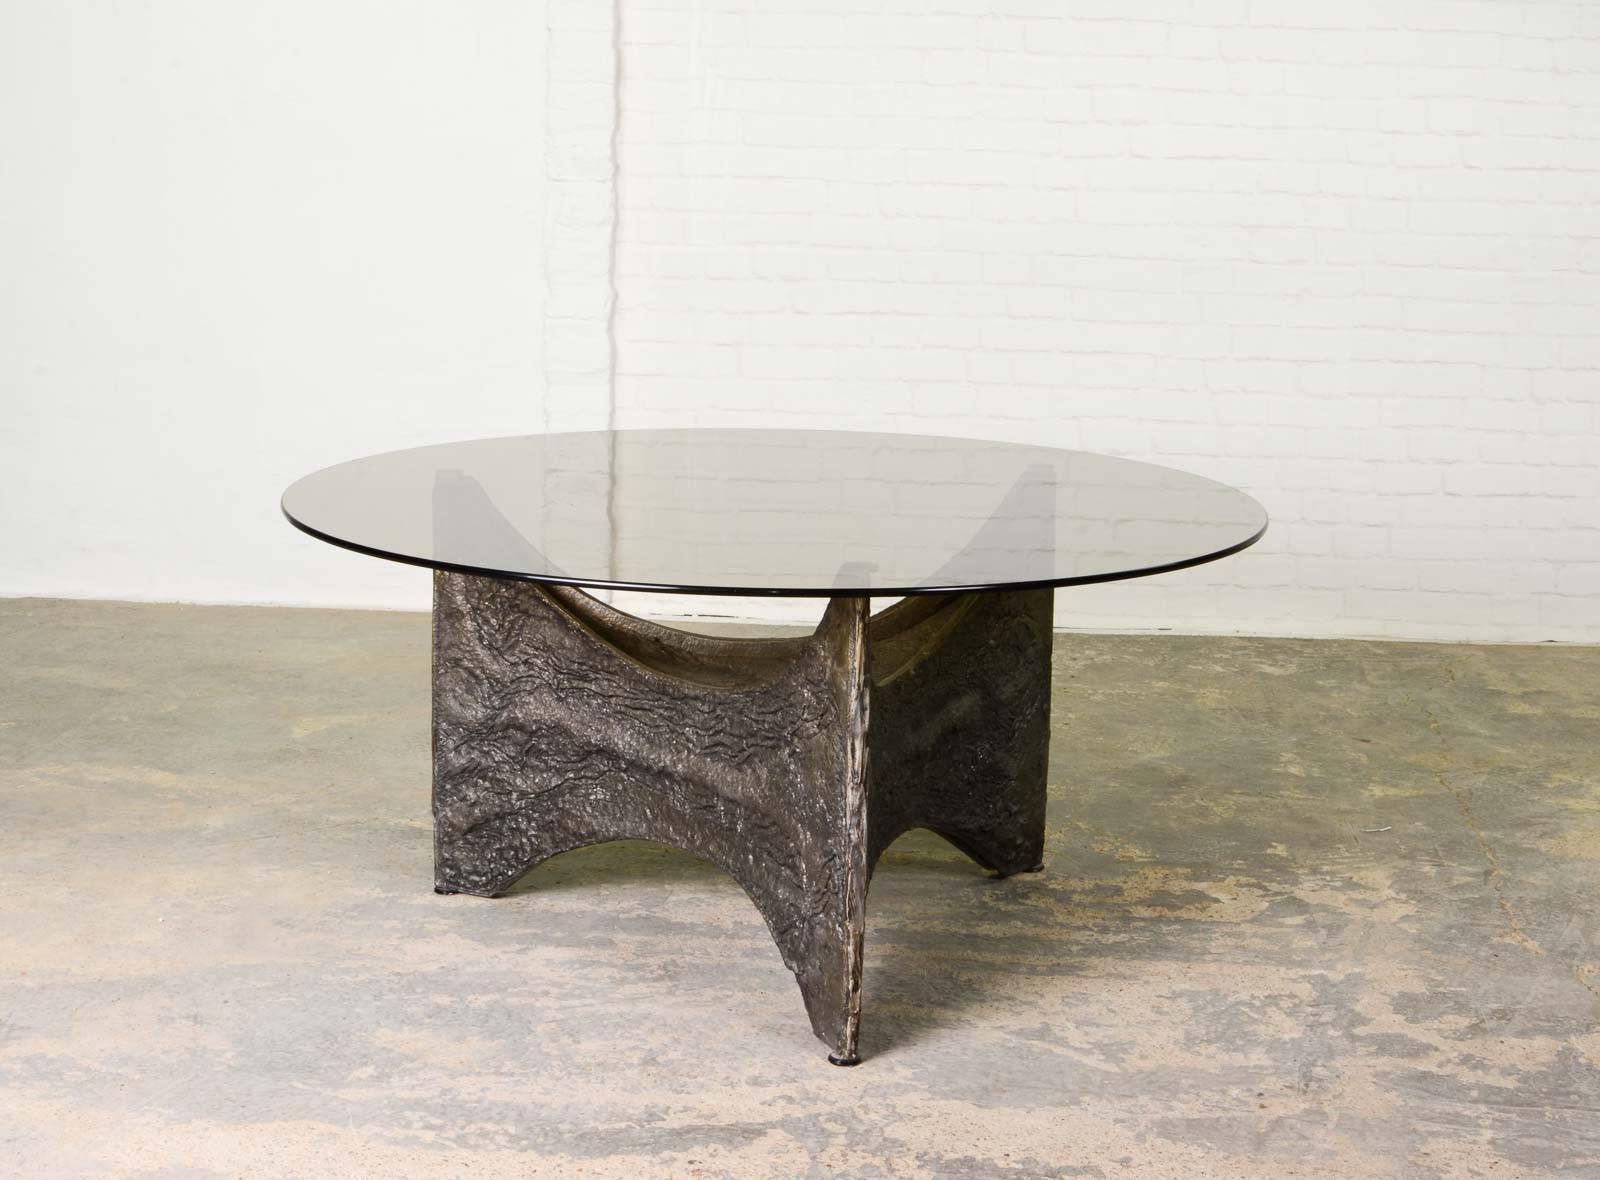 The design of this Brutalist-style coffee table is reminiscent of Paul Evans designs. The base is sculptured with an aluminium and iron alloy. The glass tabletop show some minor signs of use. Inside the framework is a lamp attached that illuminates